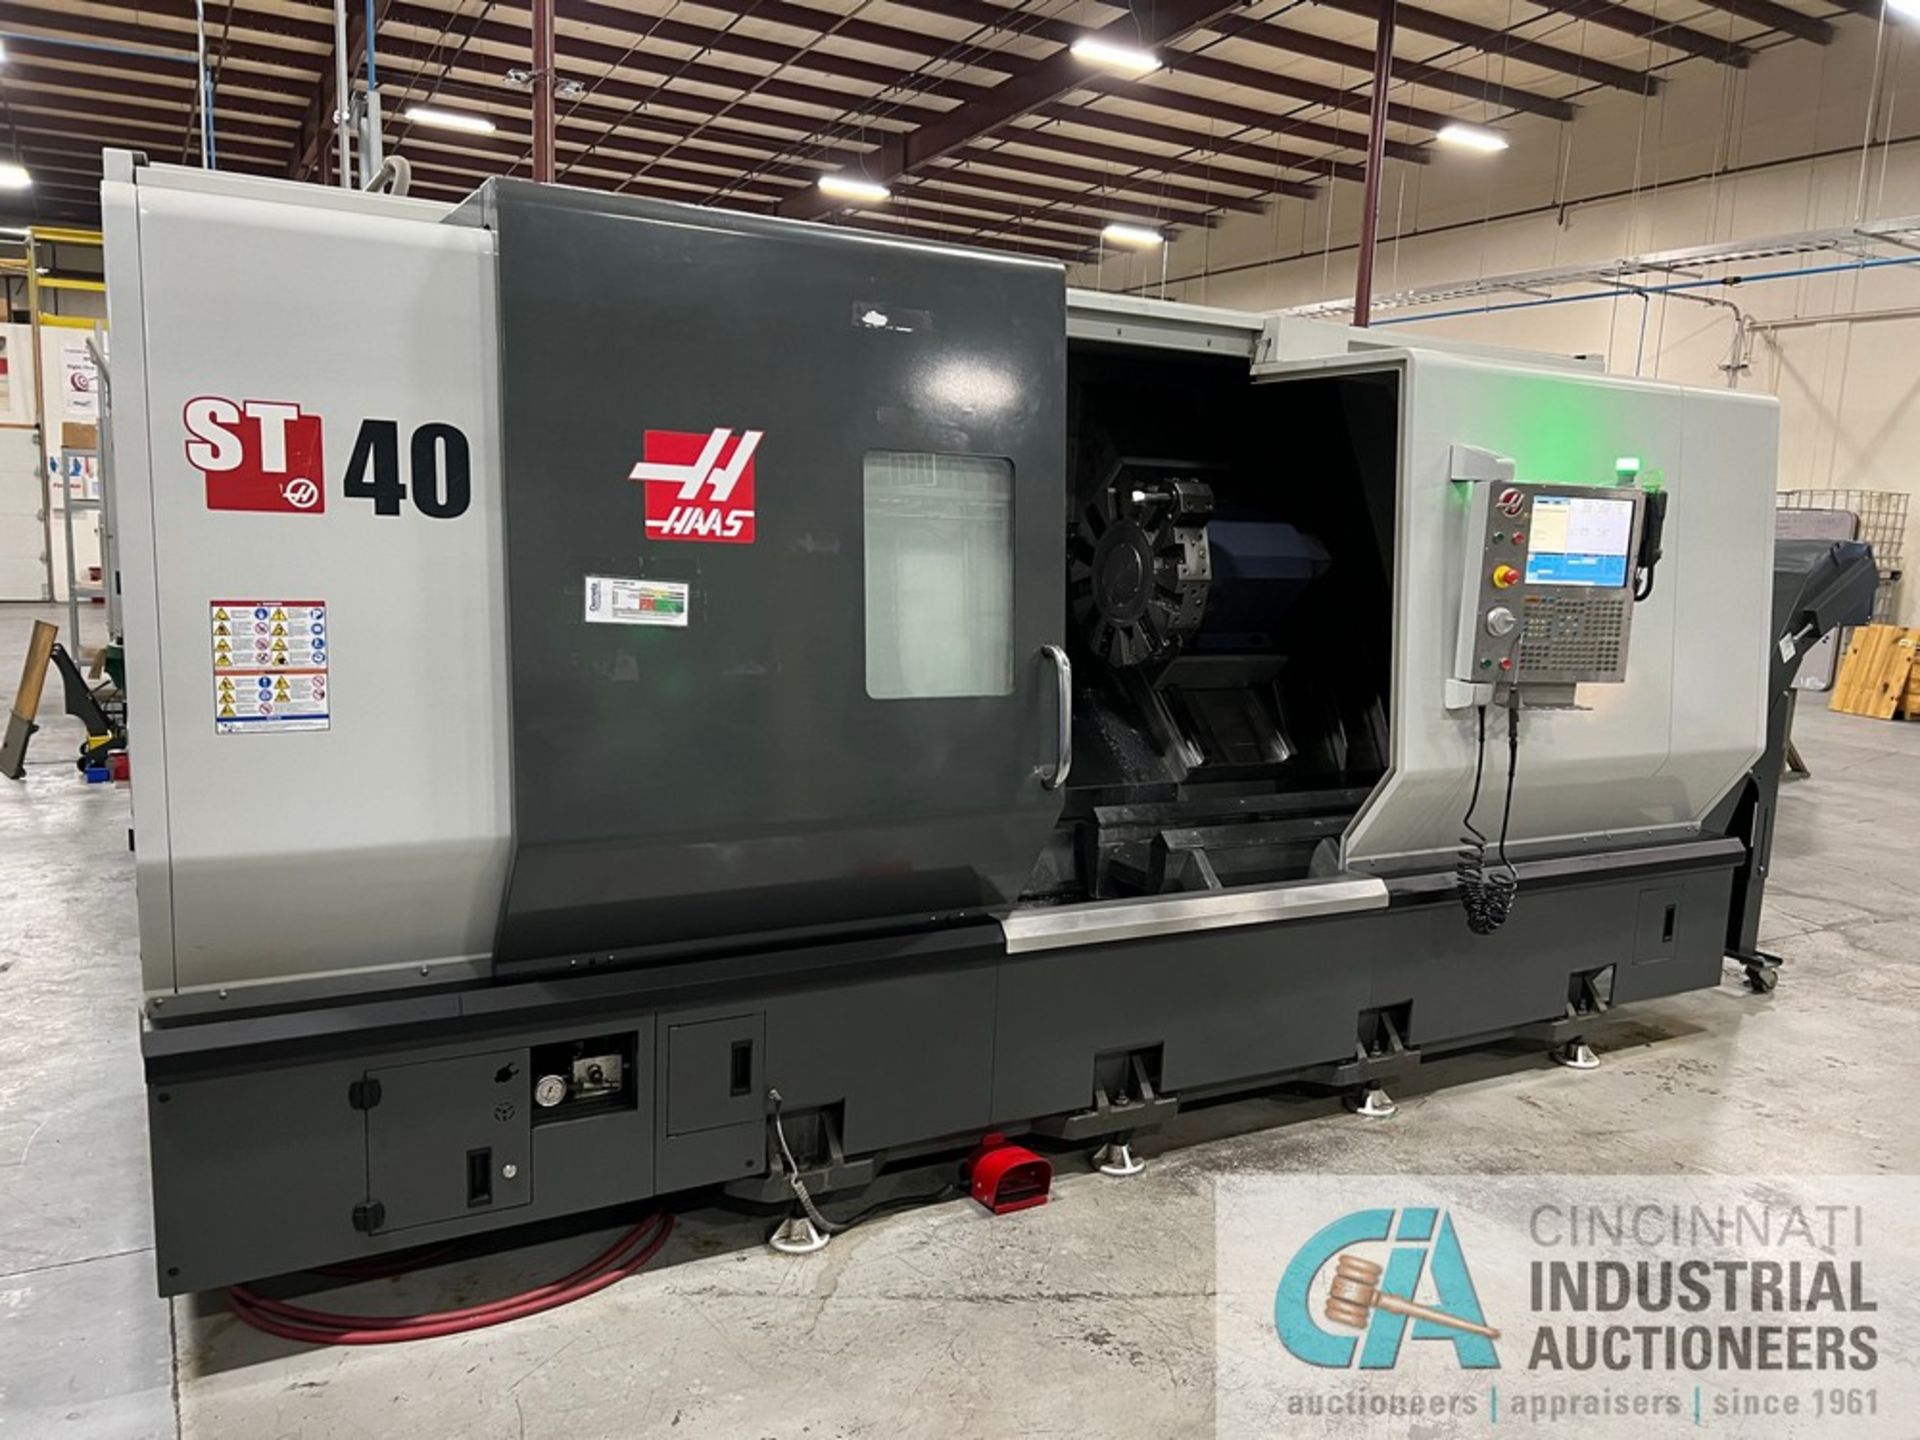 Haas Model ST-40 CNC Turning Center (2014) 1,788 Cutting Hours Showing - Image 4 of 12